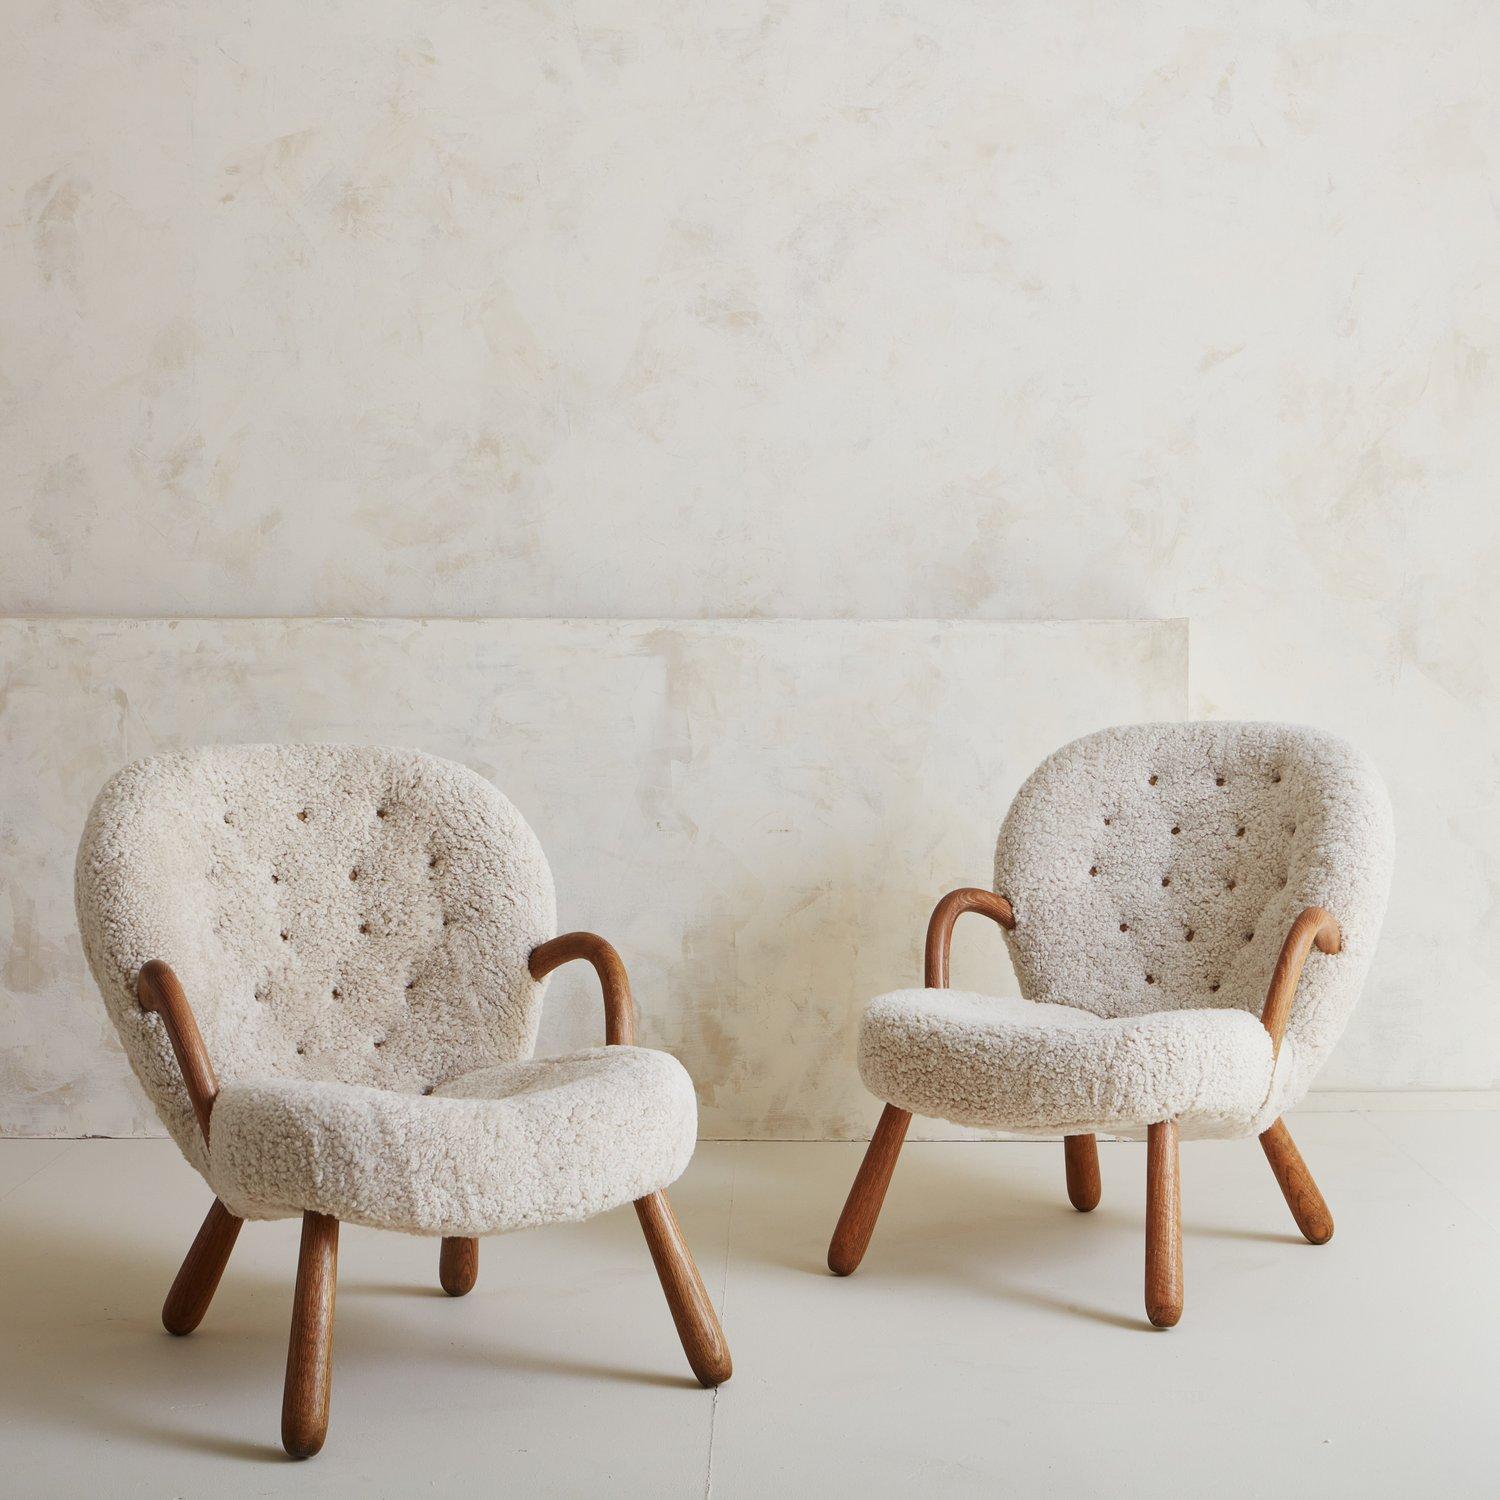 A pair of vintage Clam chairs designed by Danish architect Philip Arctander in 1944. These chairs were newly reupholstered in a luxe shearling with subtle tufting. We love the rounded arms, beech legs and curved shape on these incredibly comfortable